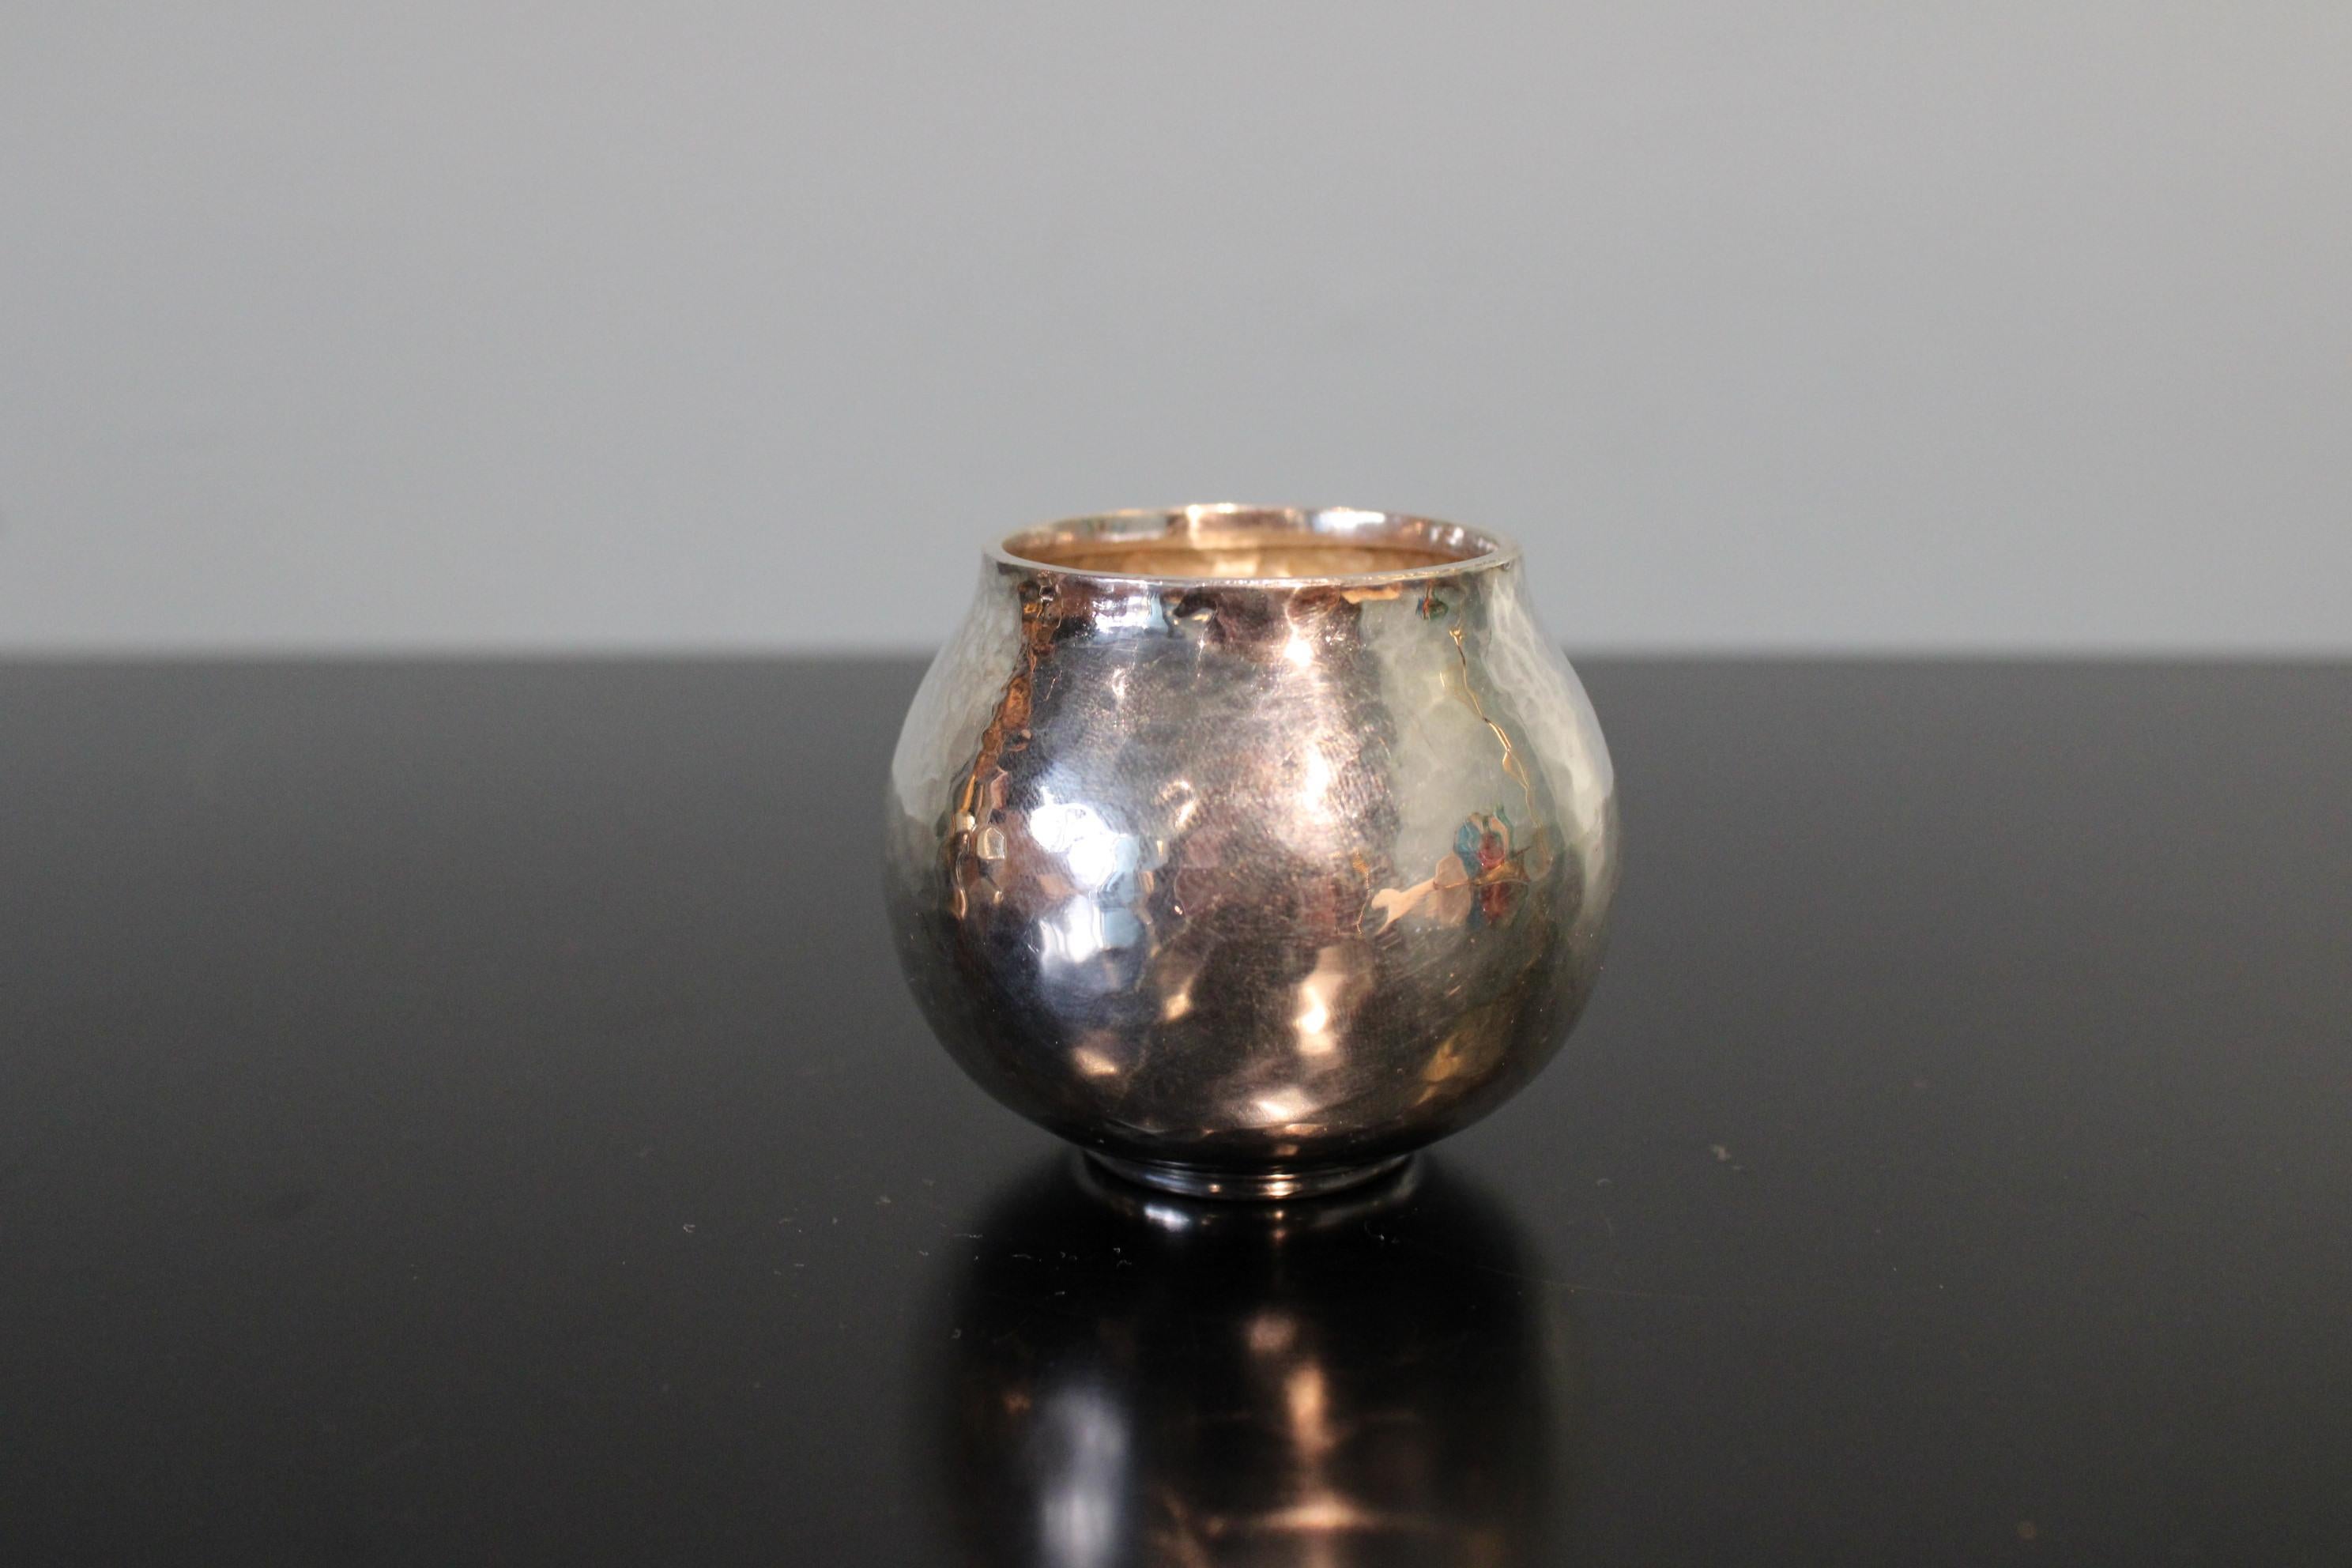 Small vase in solid silver 925/100, hammered.
Signed under the base Lalaounis.
Weight: 58 g.